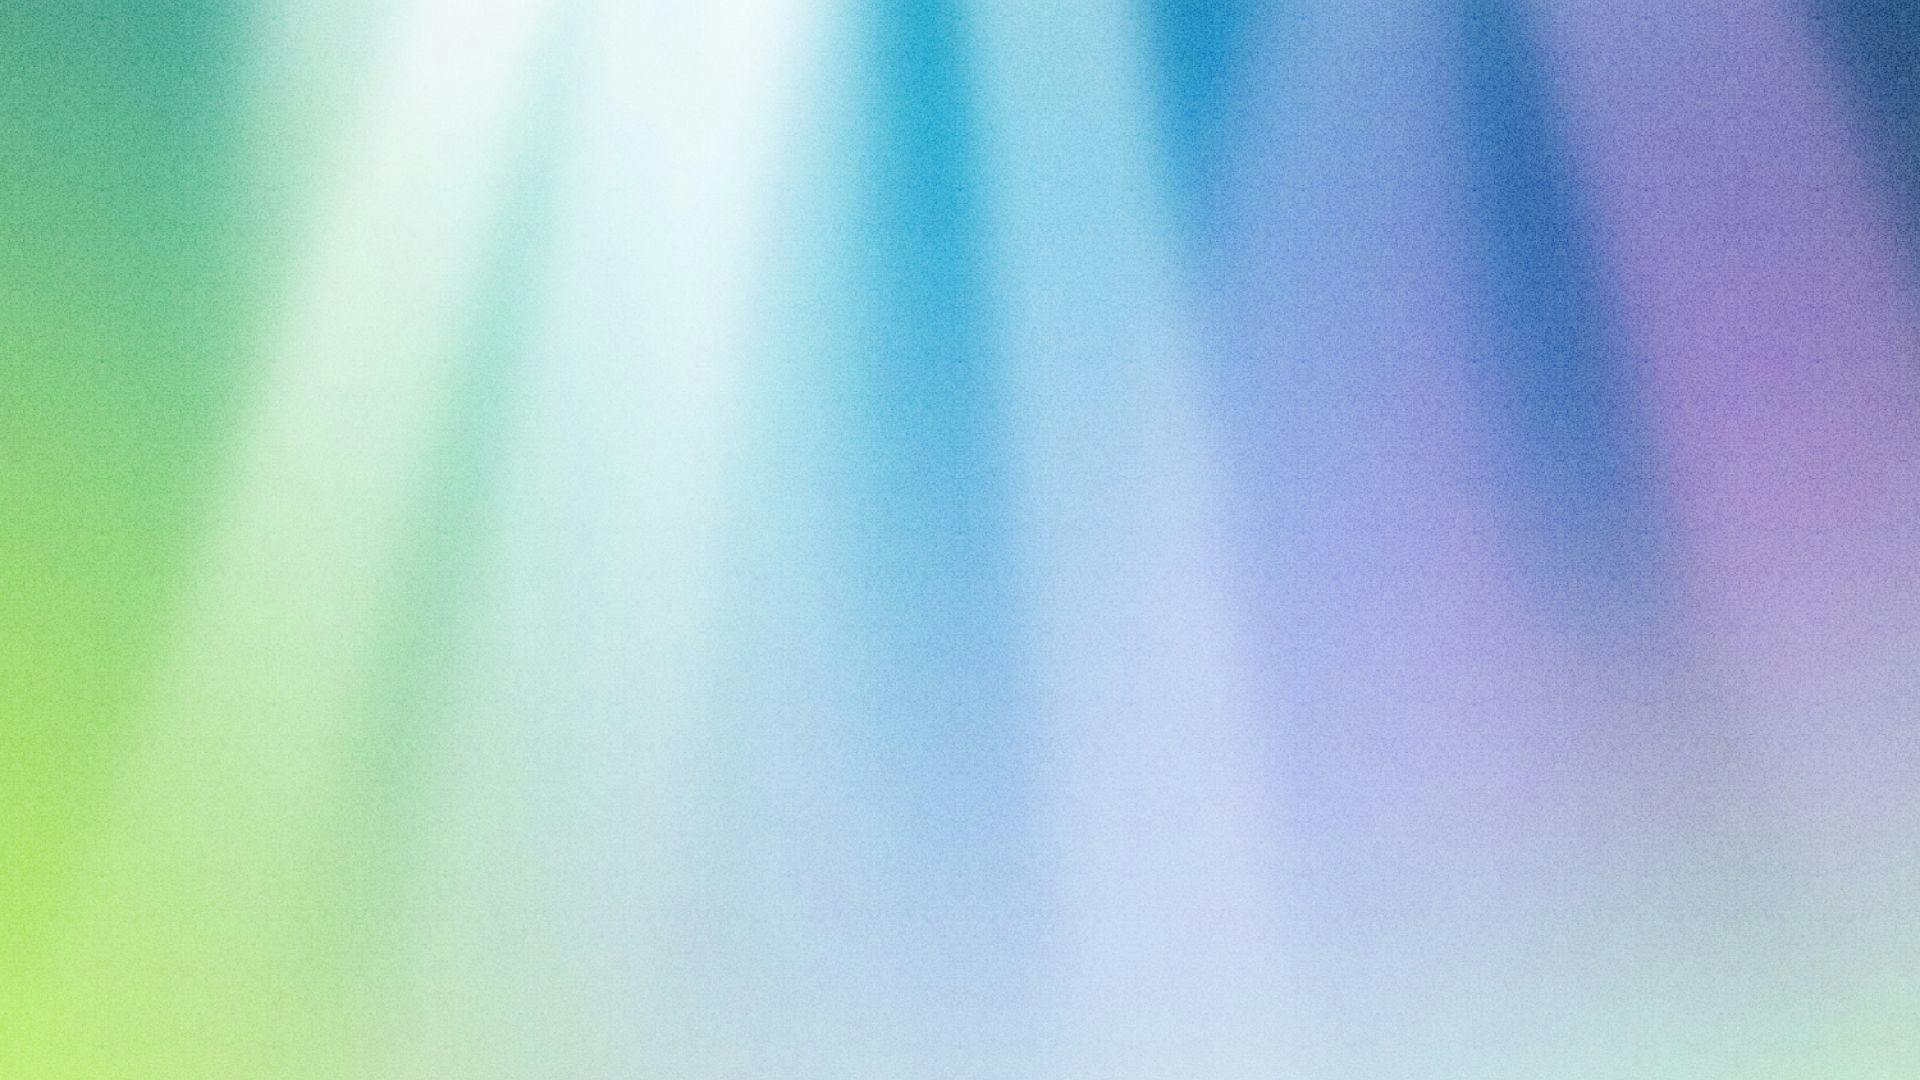 Green, blue, and purple background with white light beams from the top